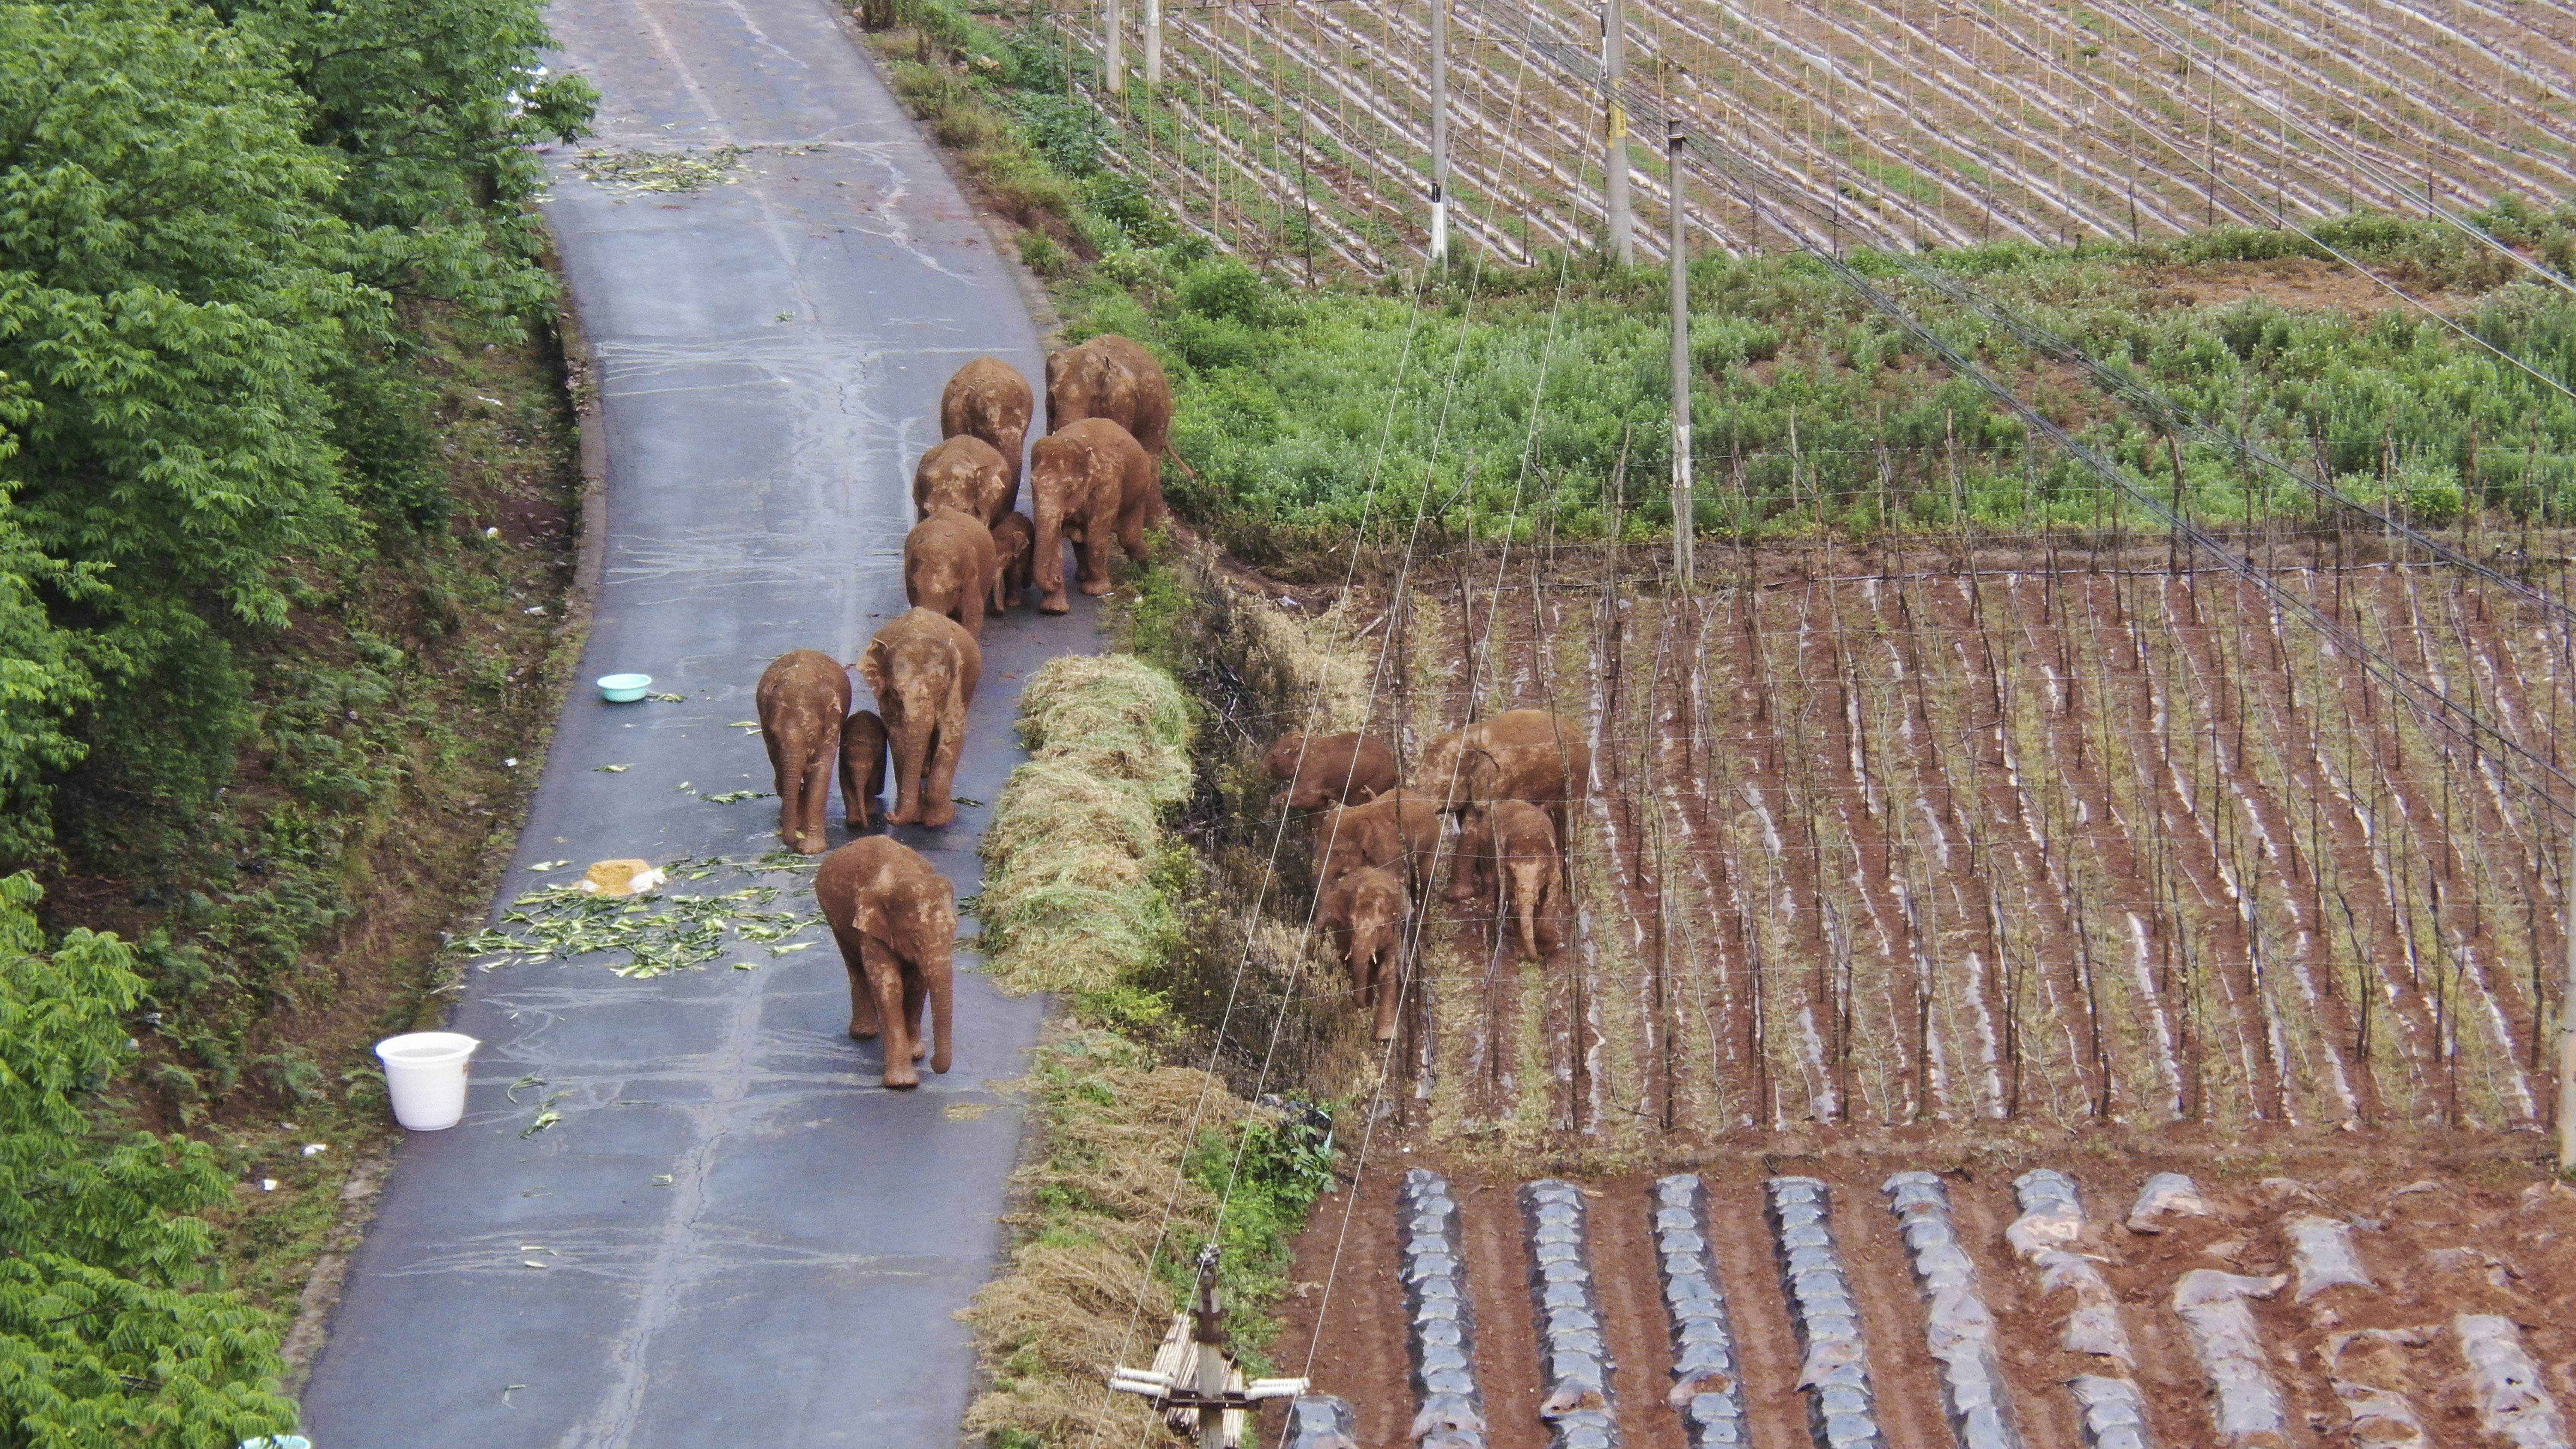 A migrating herd of elephants roam through farmlands of Shuanghe Township, Jinning District of Kunming city in south-western China's Yunnan Province 